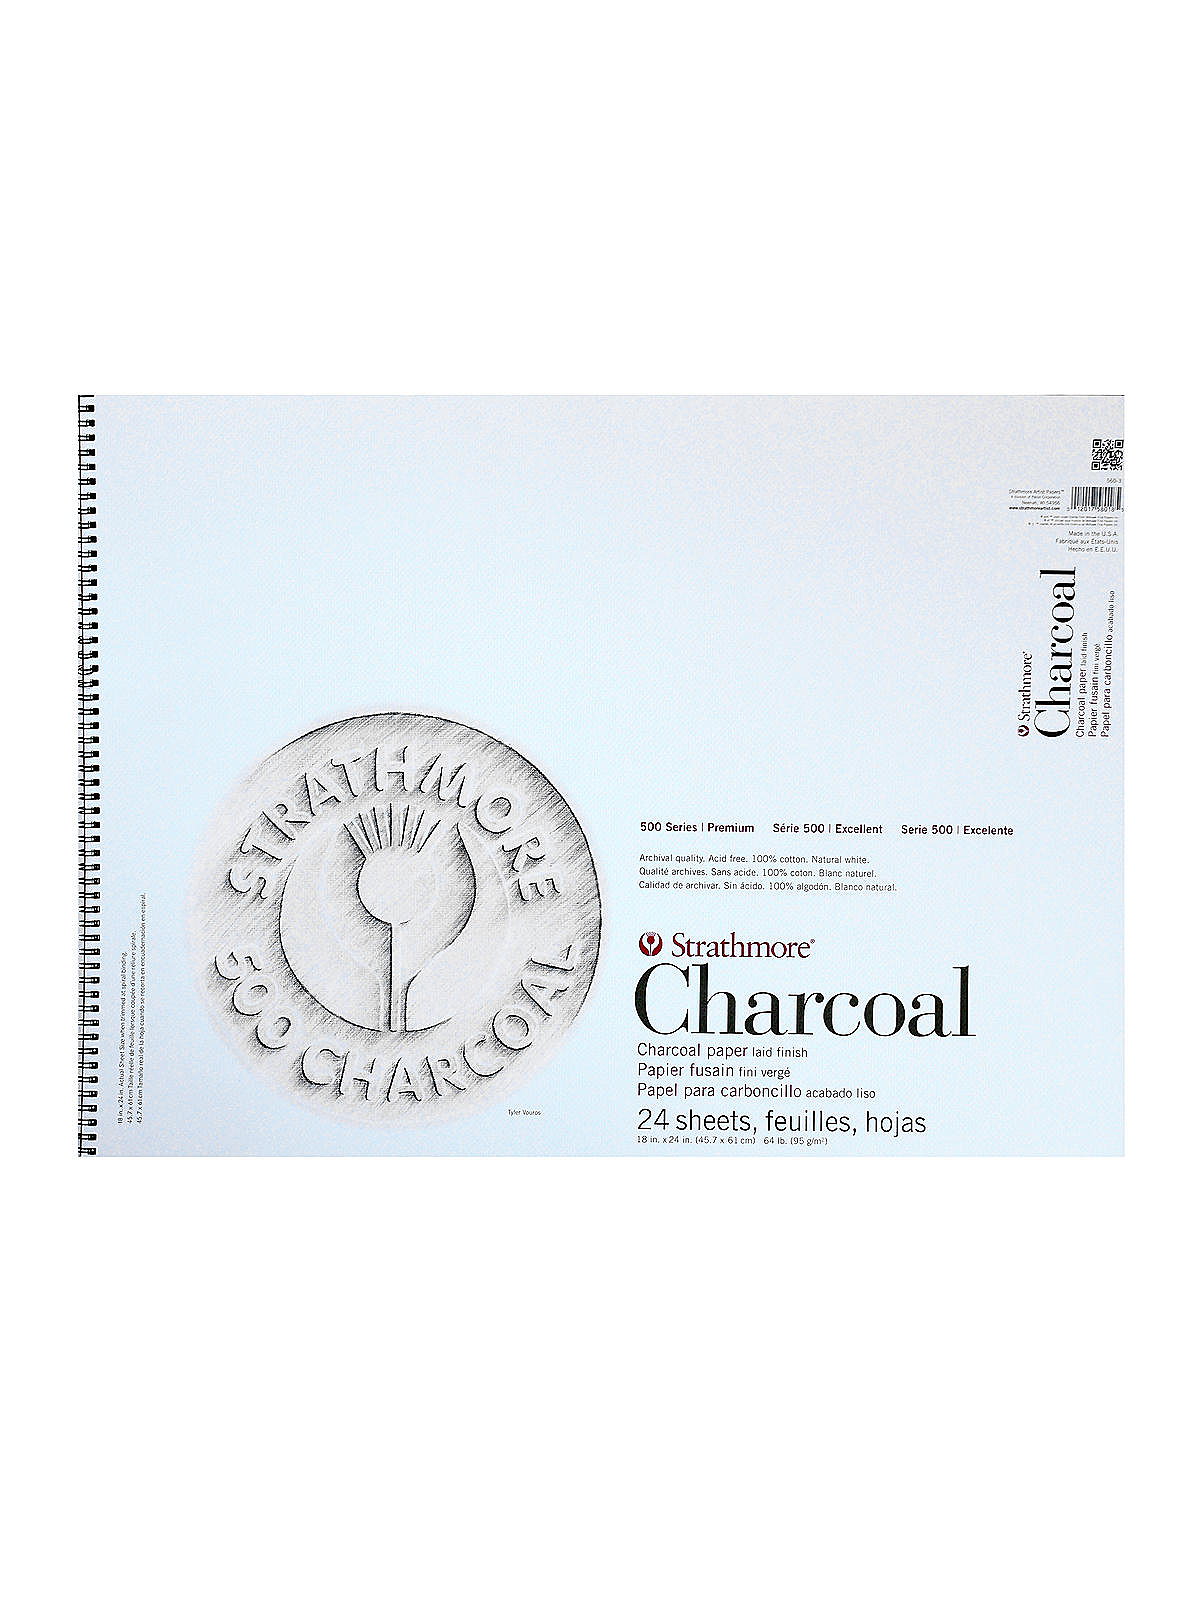 300 Series Charcoal - Strathmore Artist Papers